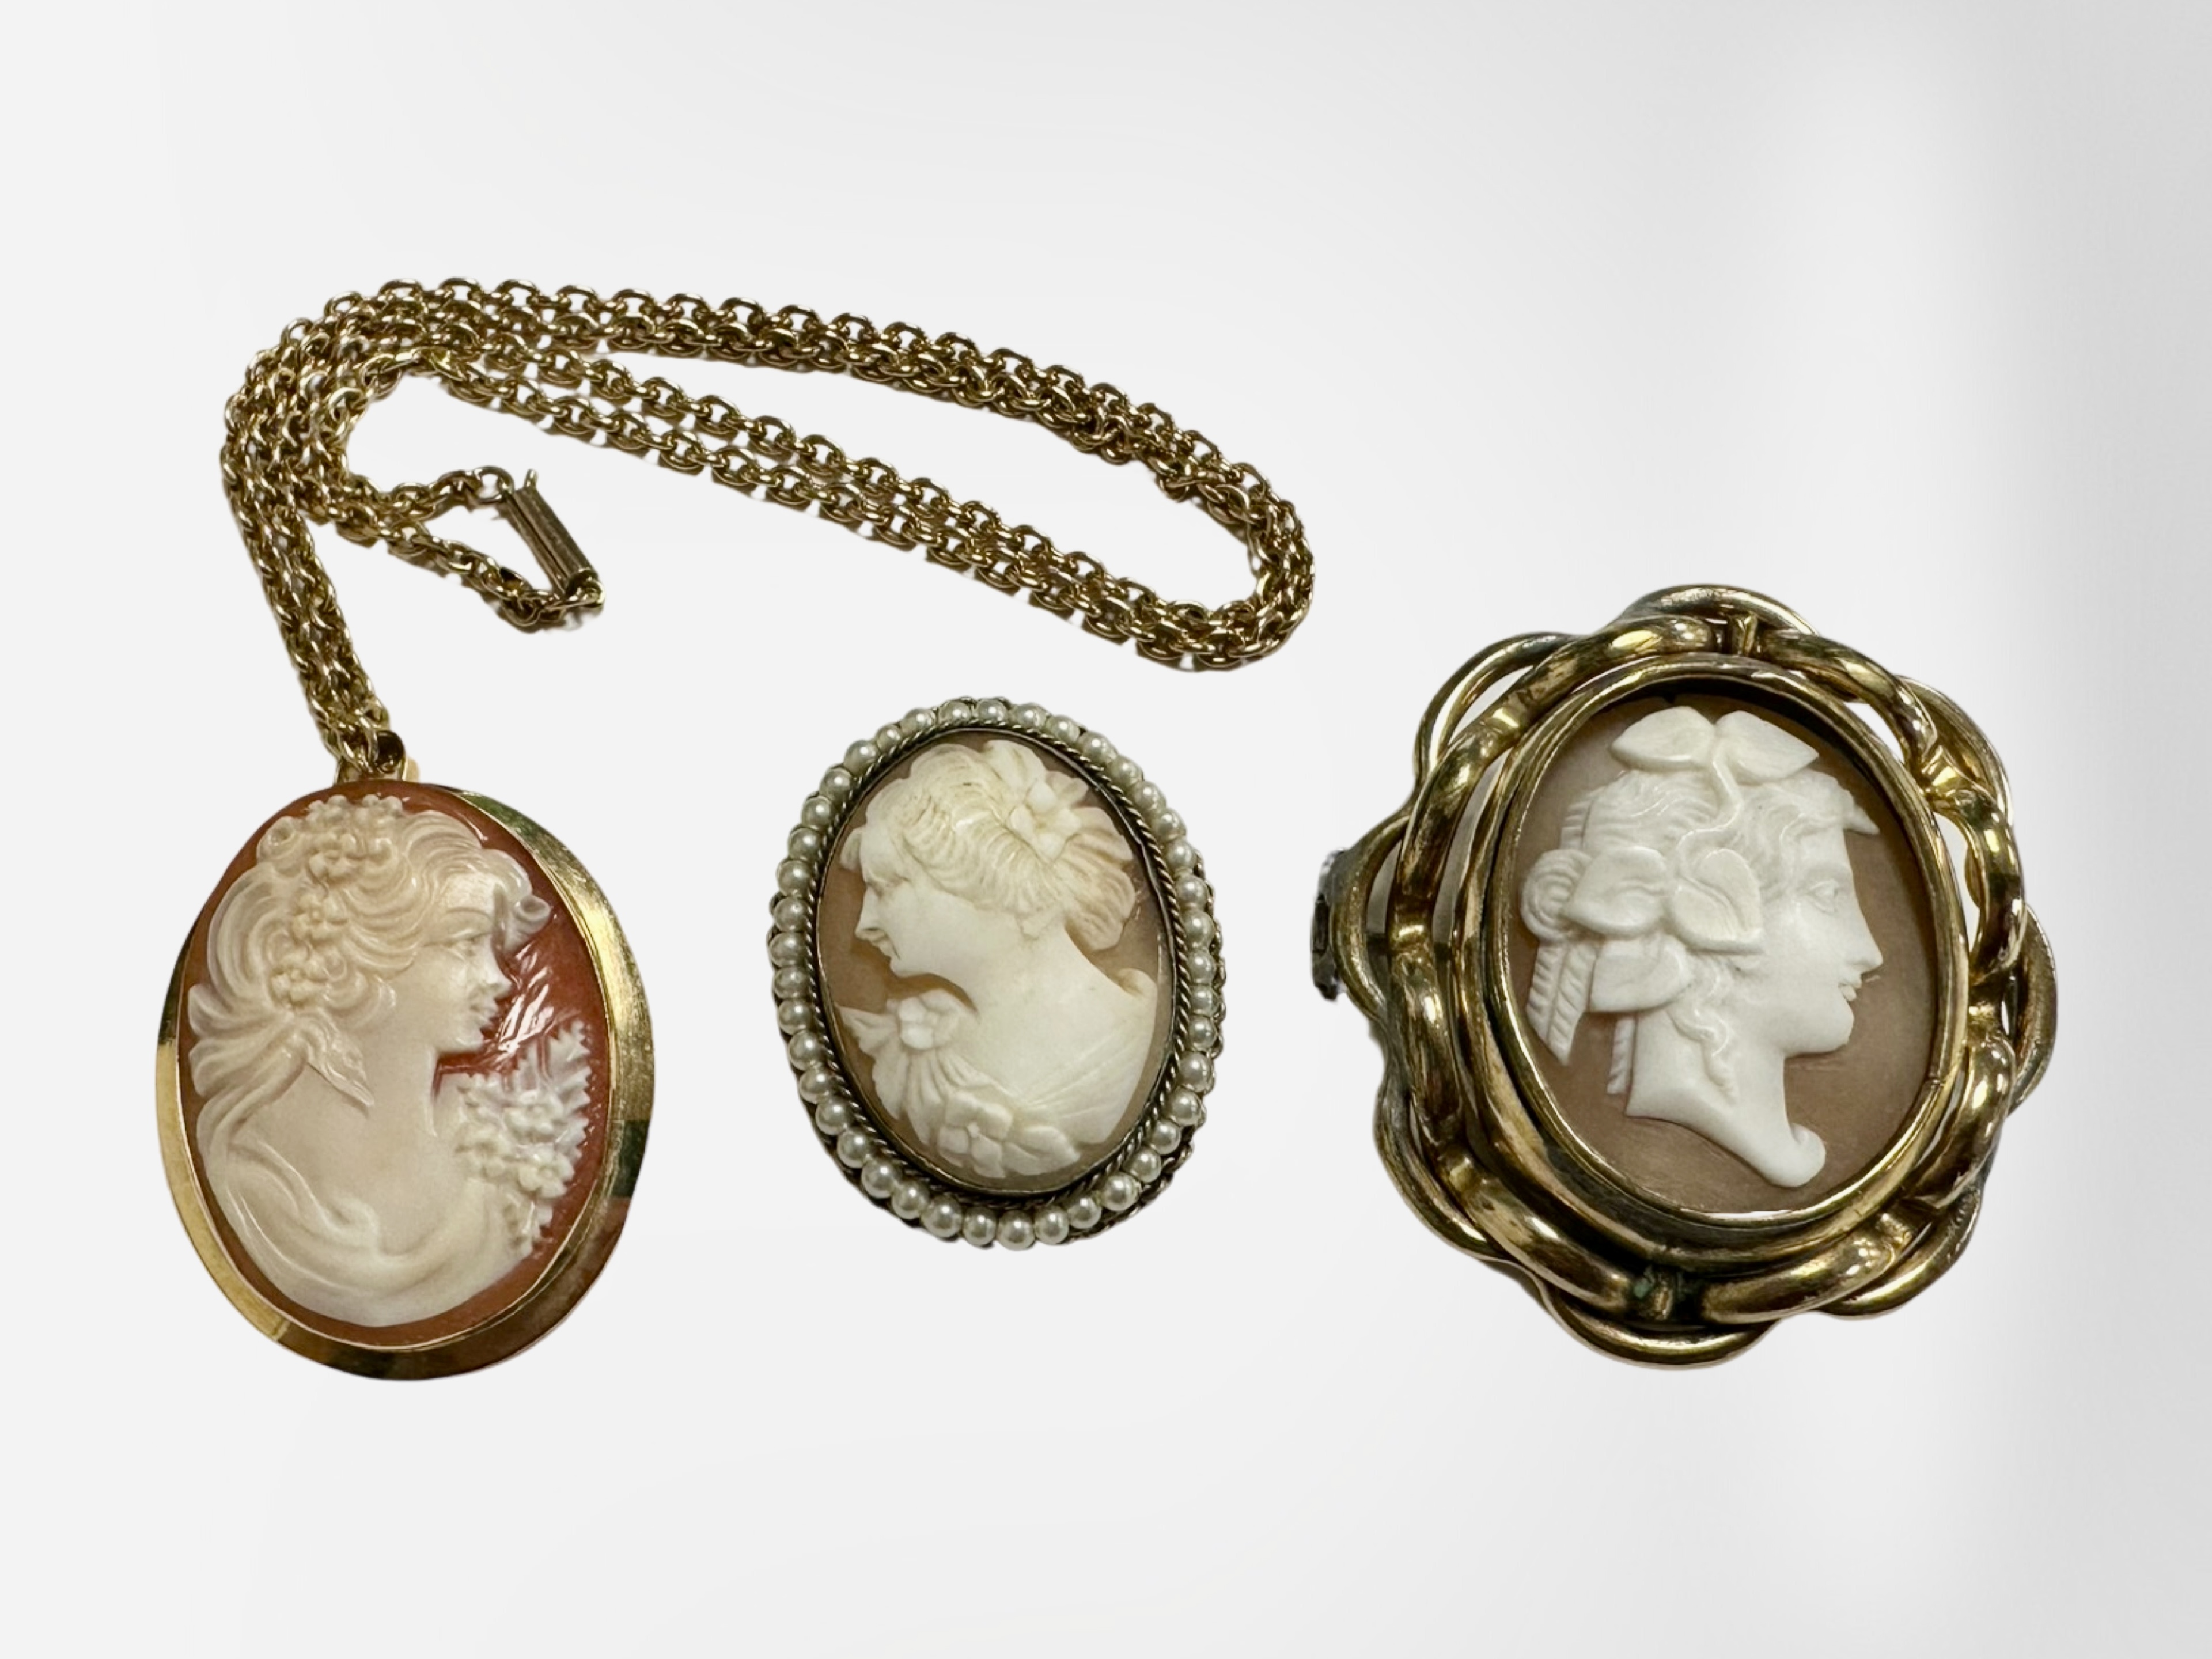 A Victorian cameo brooch together with further cameo brooch mounted in 18ct gold suspended on 15ct